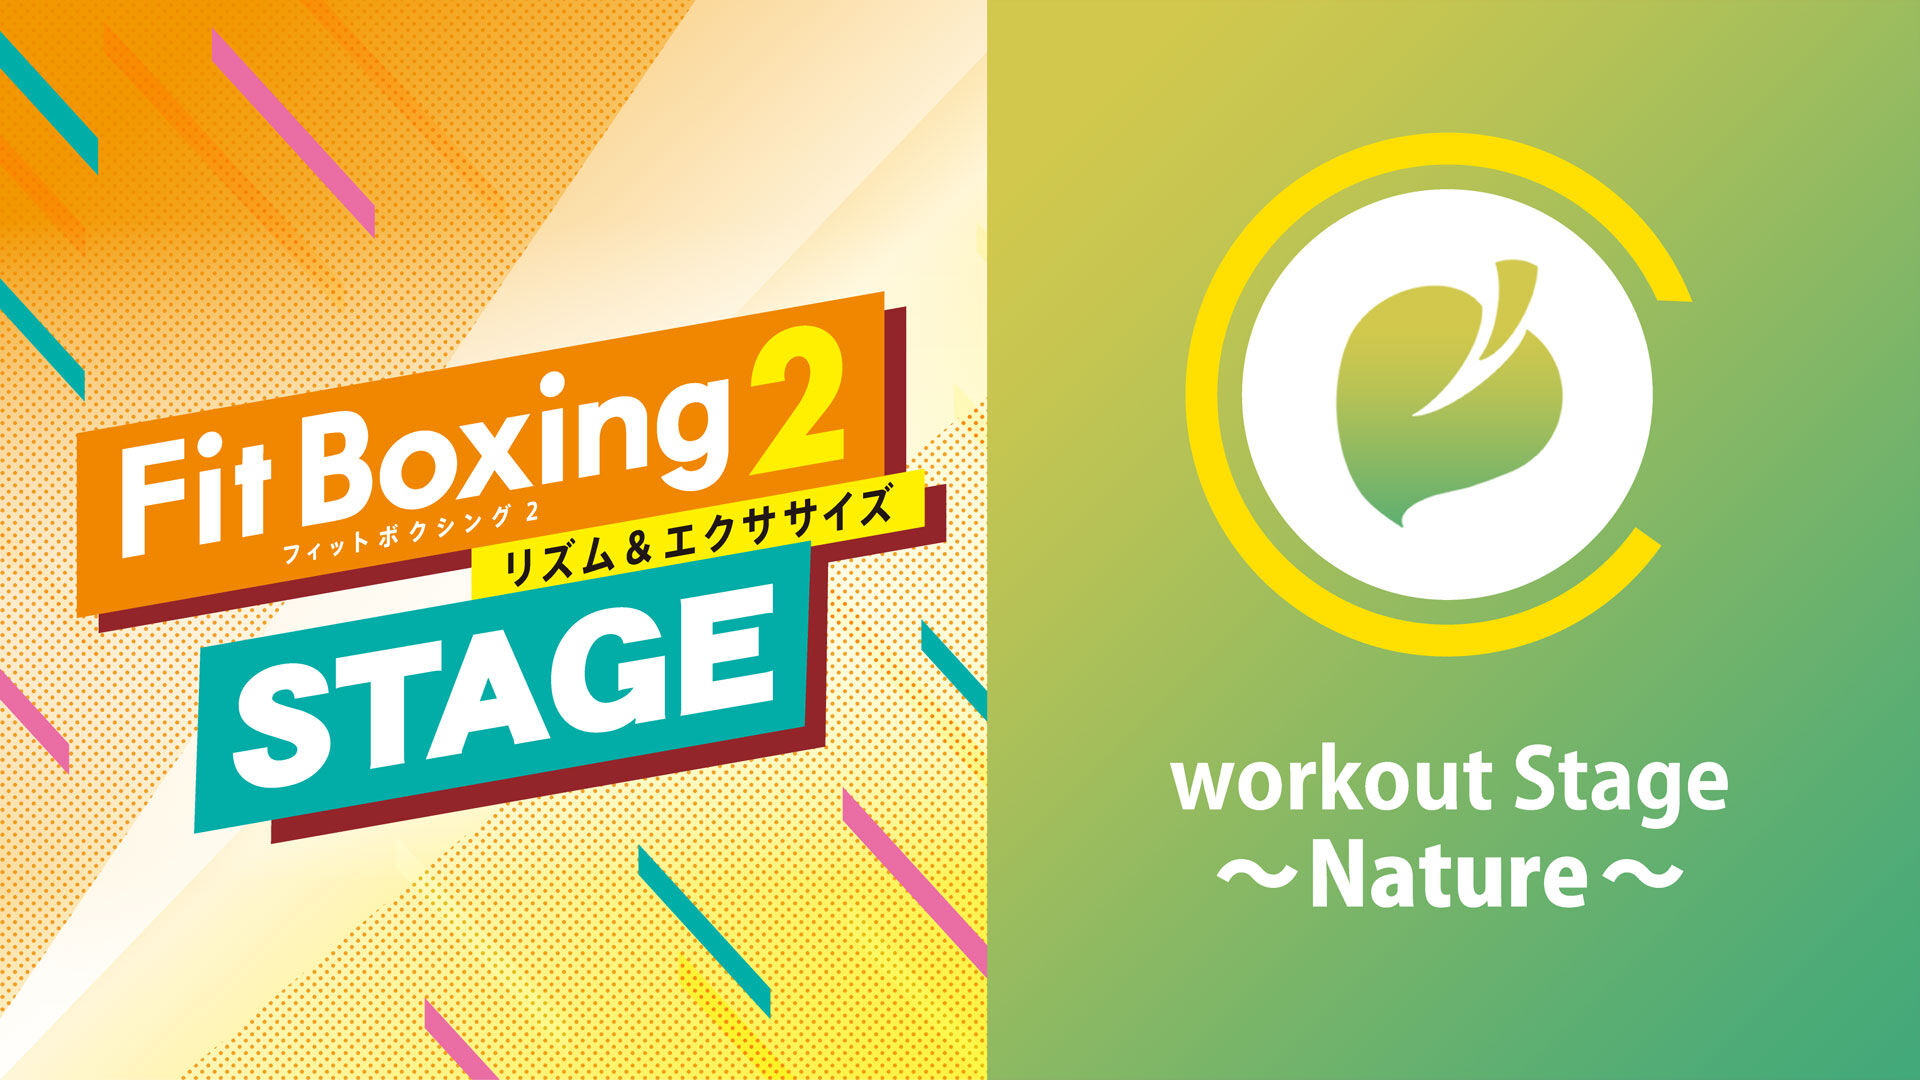 Fit Boxing 2 workout Stage ～Nature～ | My Nintendo Store